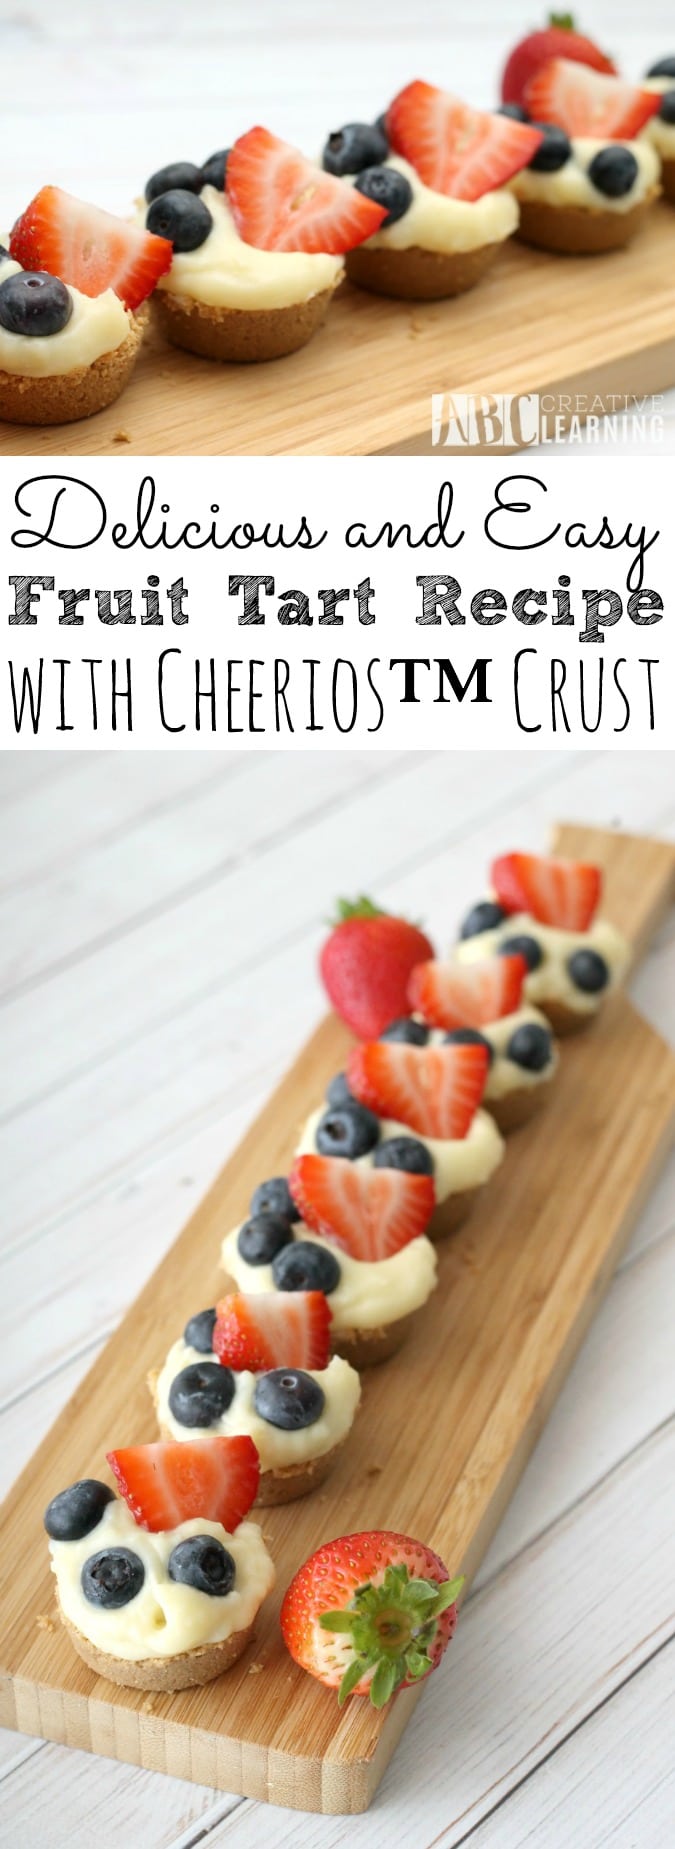 Delicious and Easy Fruit Tart Recipe with Cheerios Crust - simplytodaylife.com